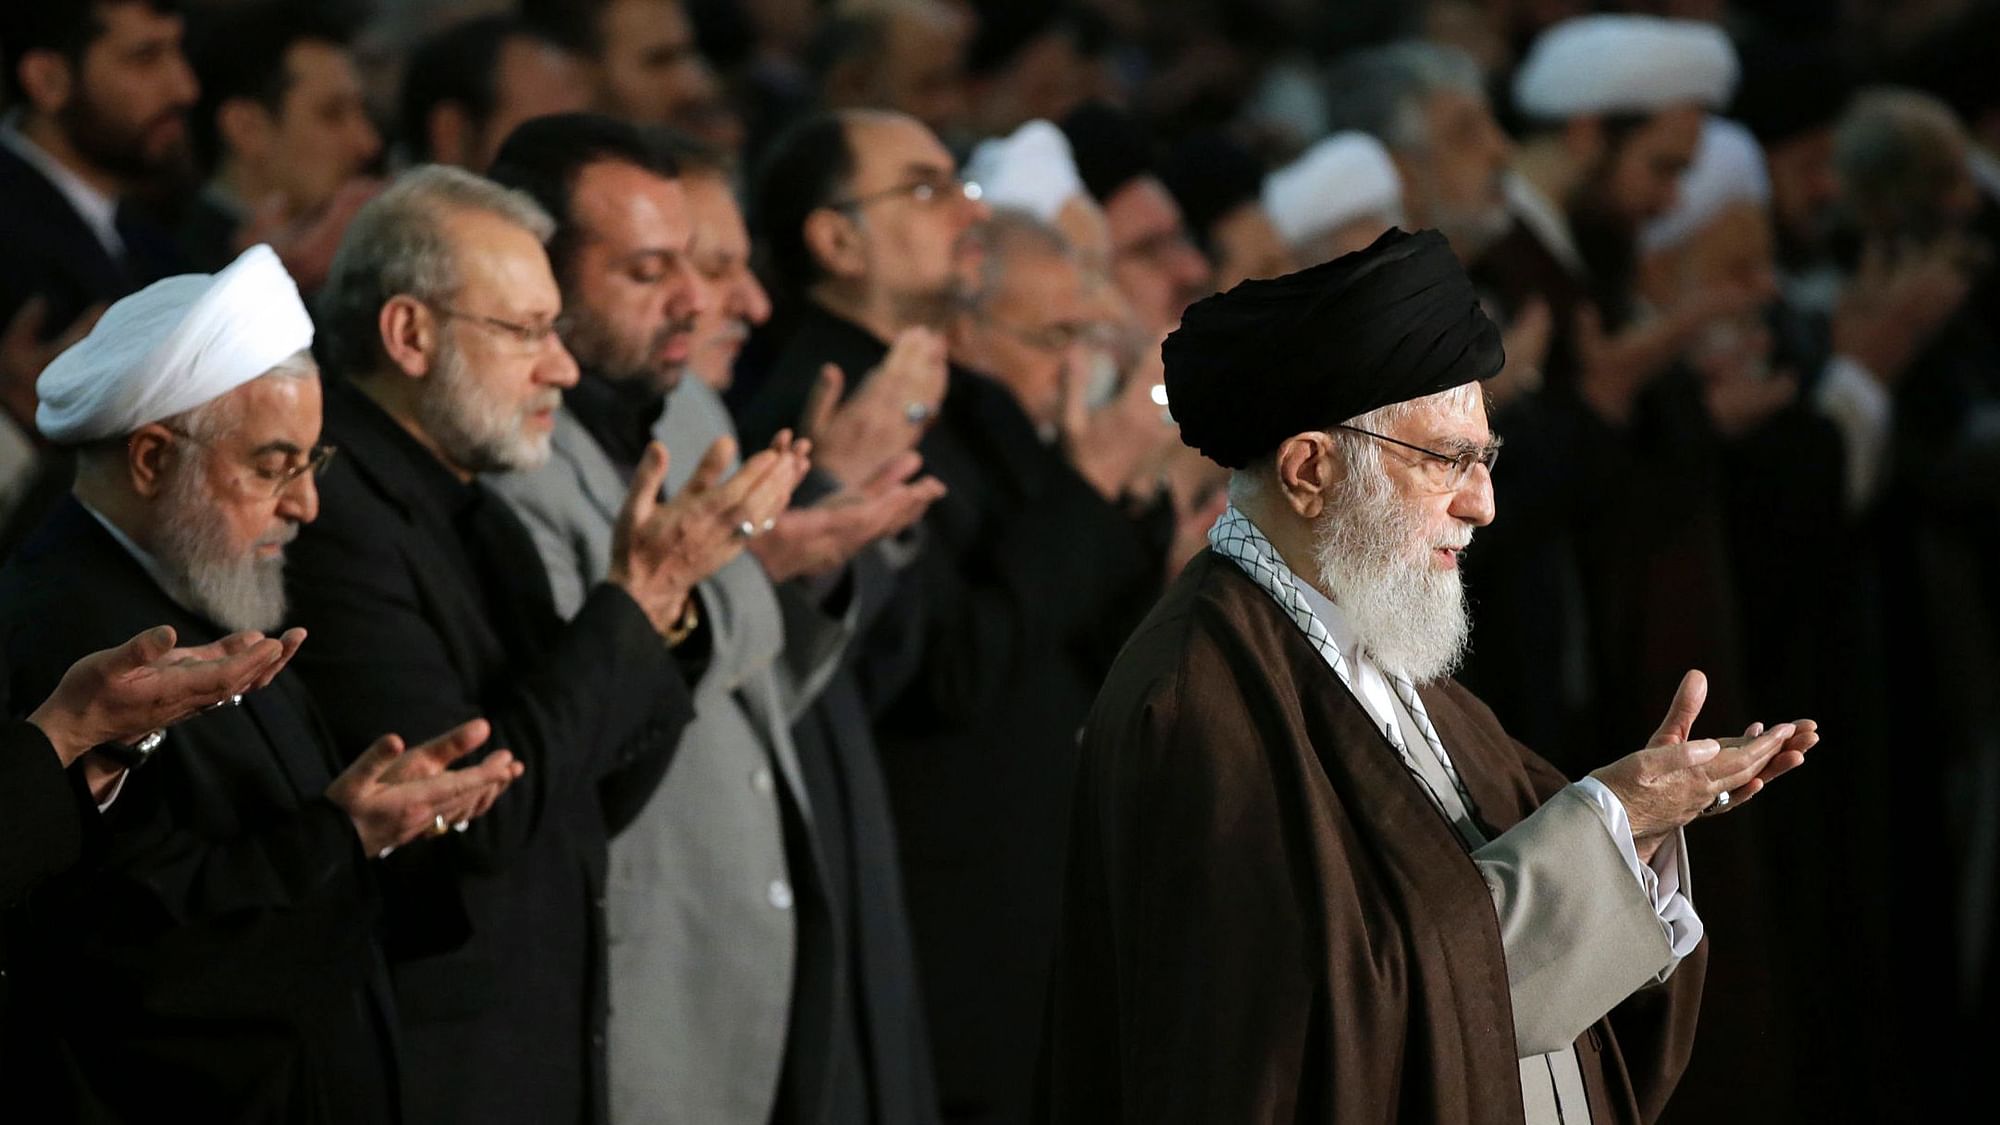 Ayatollah Ali Khamenei said the mass funerals for Iran’s top general, who was killed in a US airstrike earlier this month, show that the Iranian people support the Islamic Republic despite its recent trials.